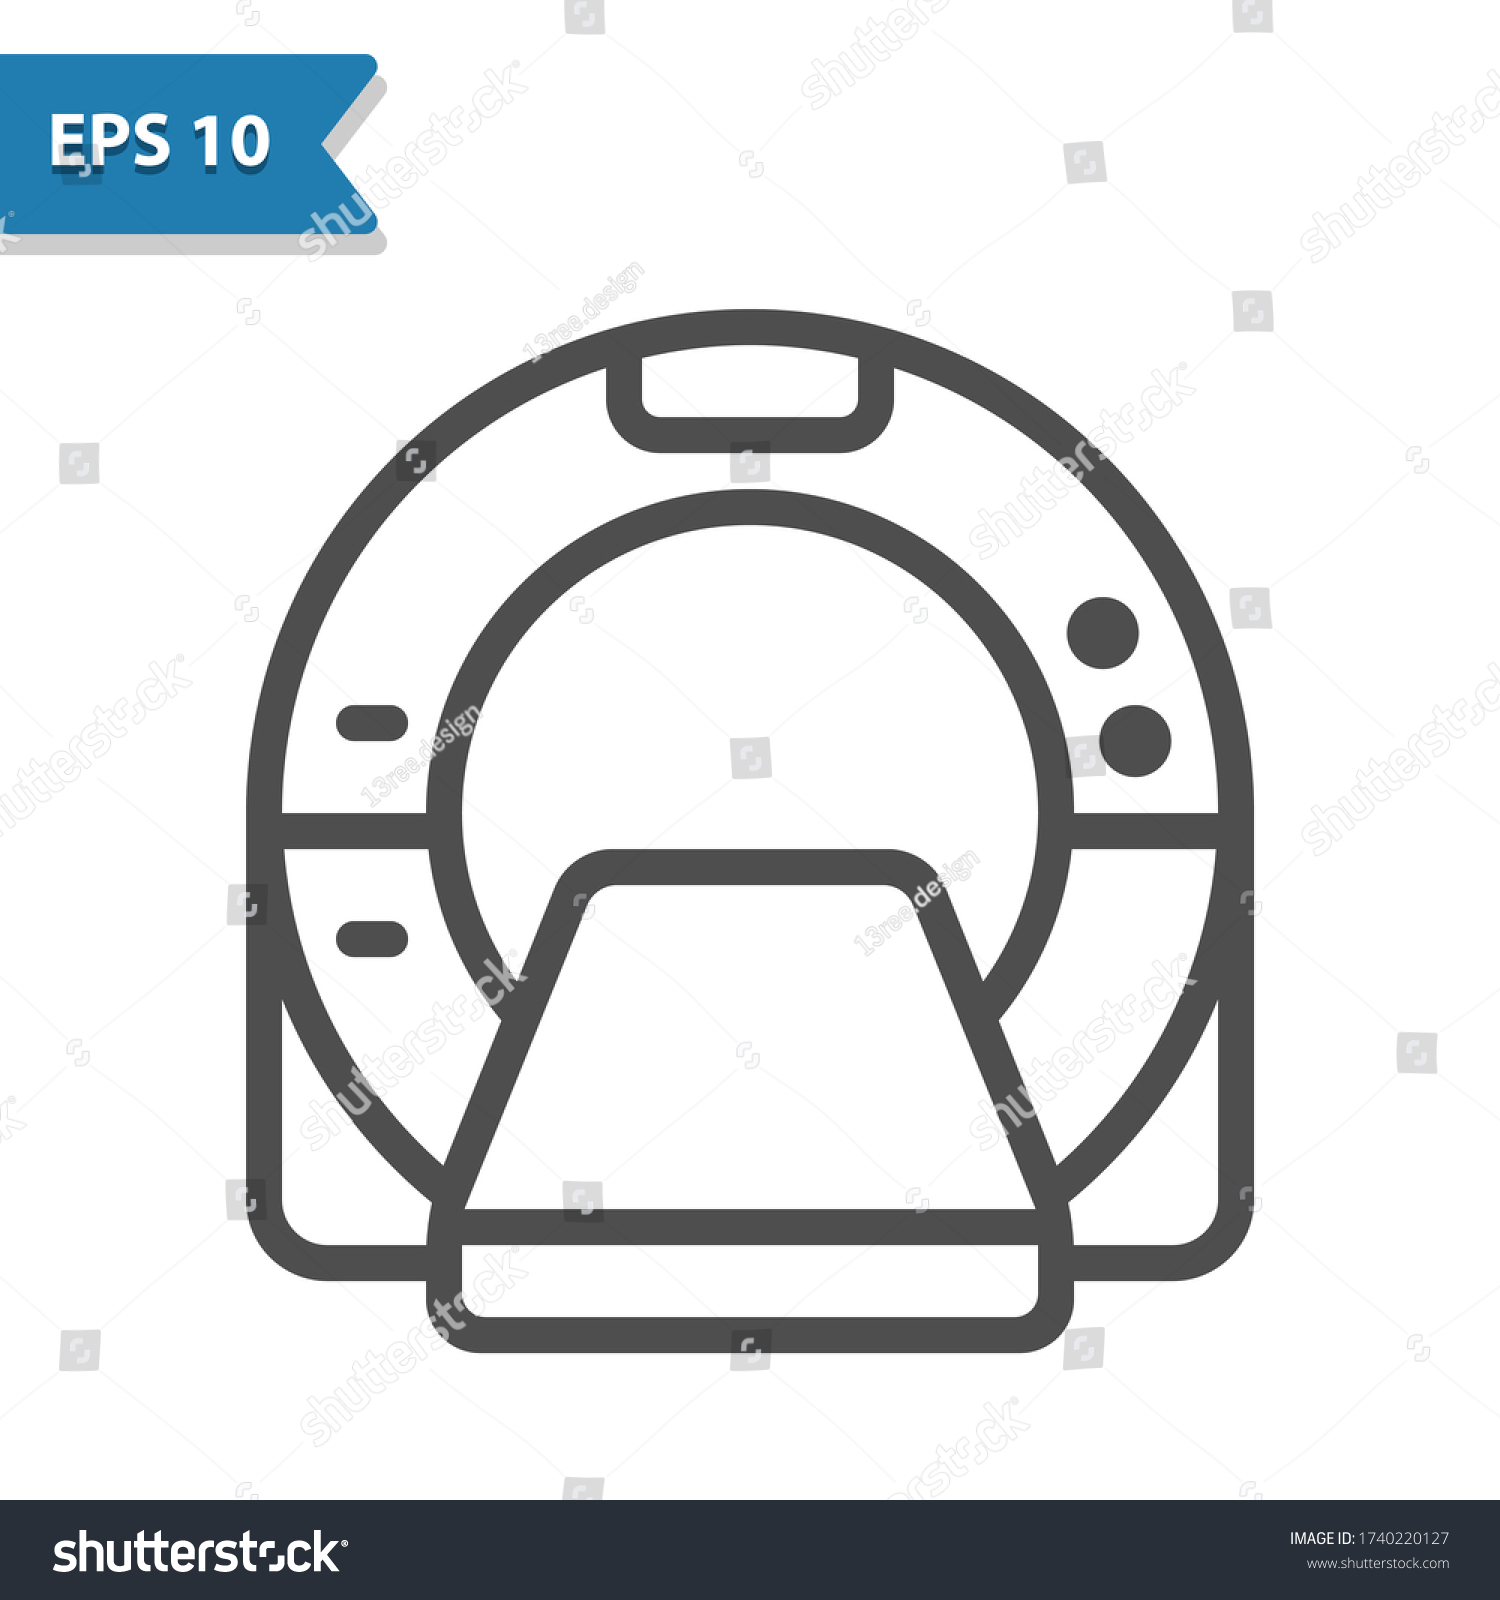 SVG of MRI Machine Icon. Professional, pixel perfect icon, EPS 10 format. svg